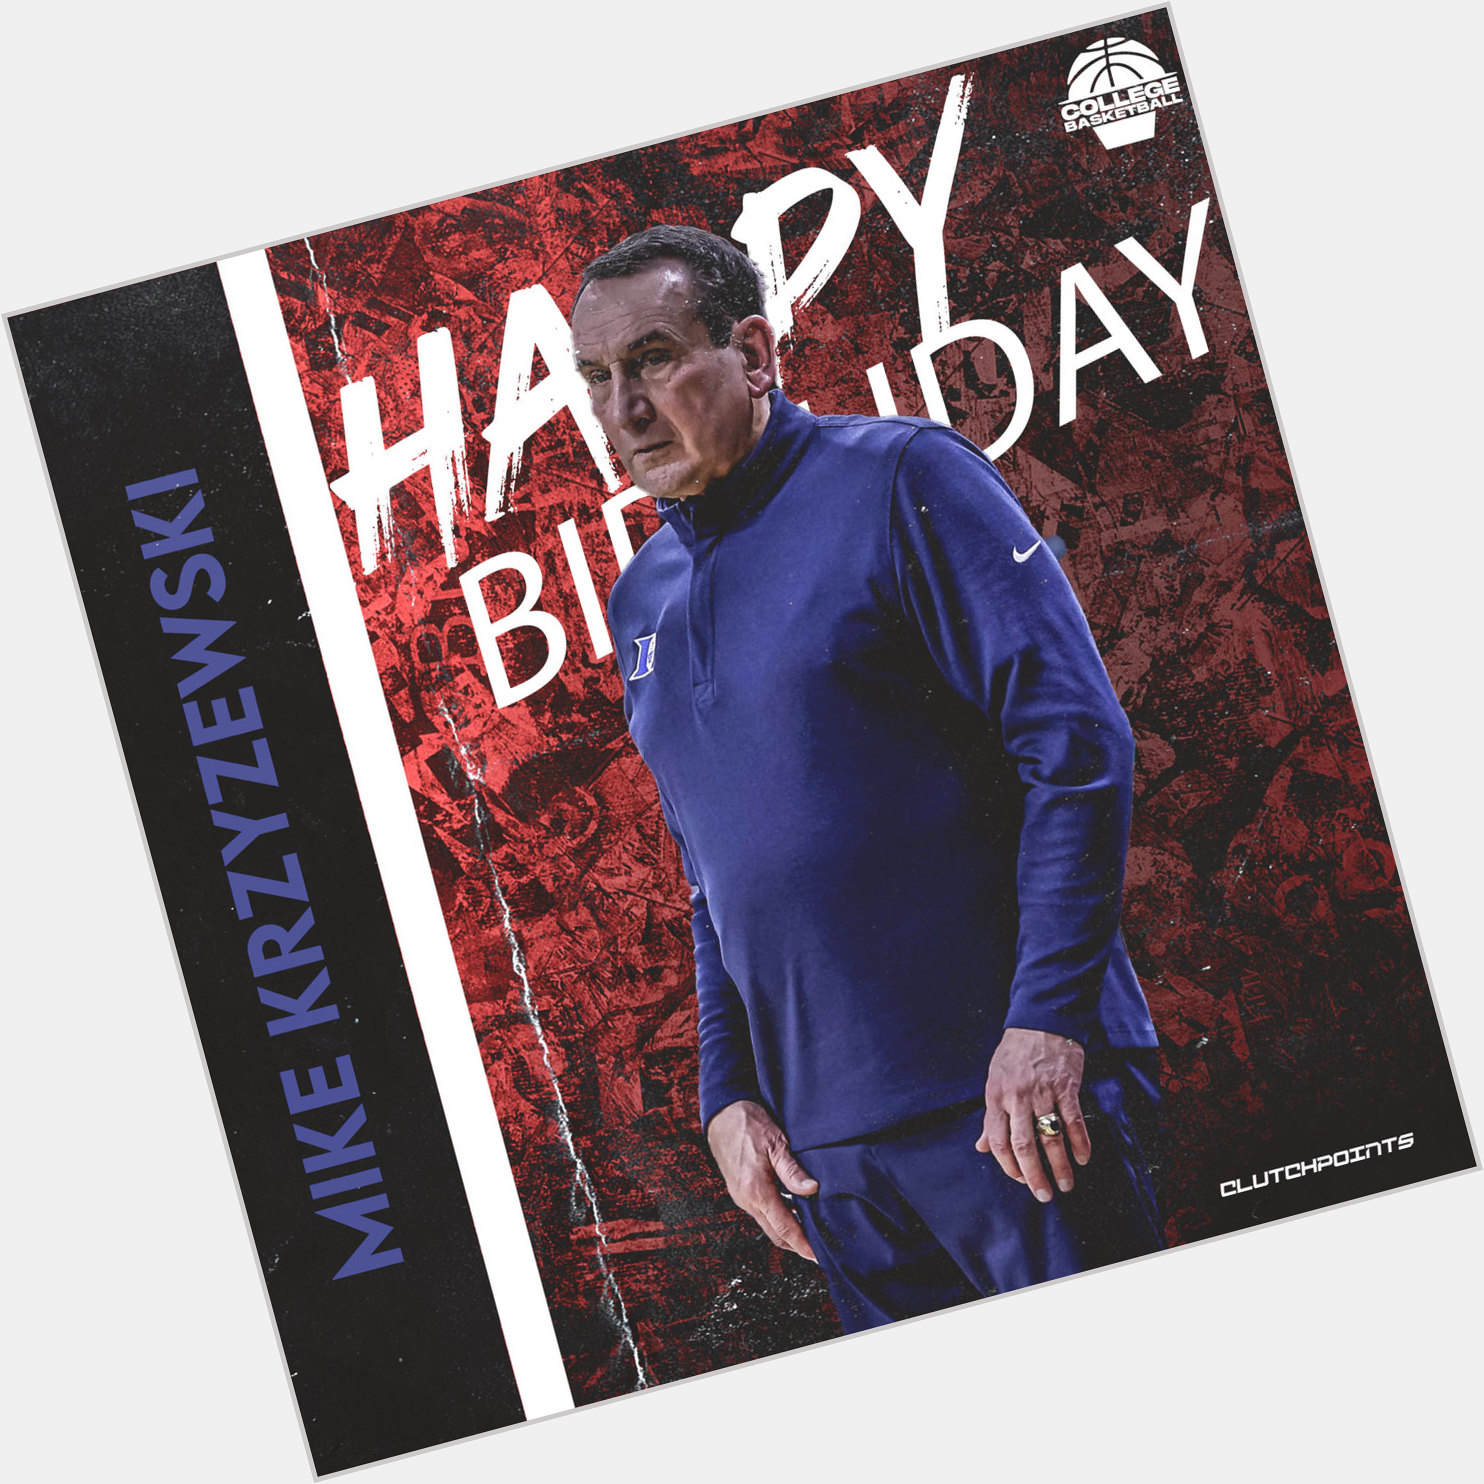 College Basketball fans, join us in greeting Coach Mike Krzyzewski a happy 75th birthday! 